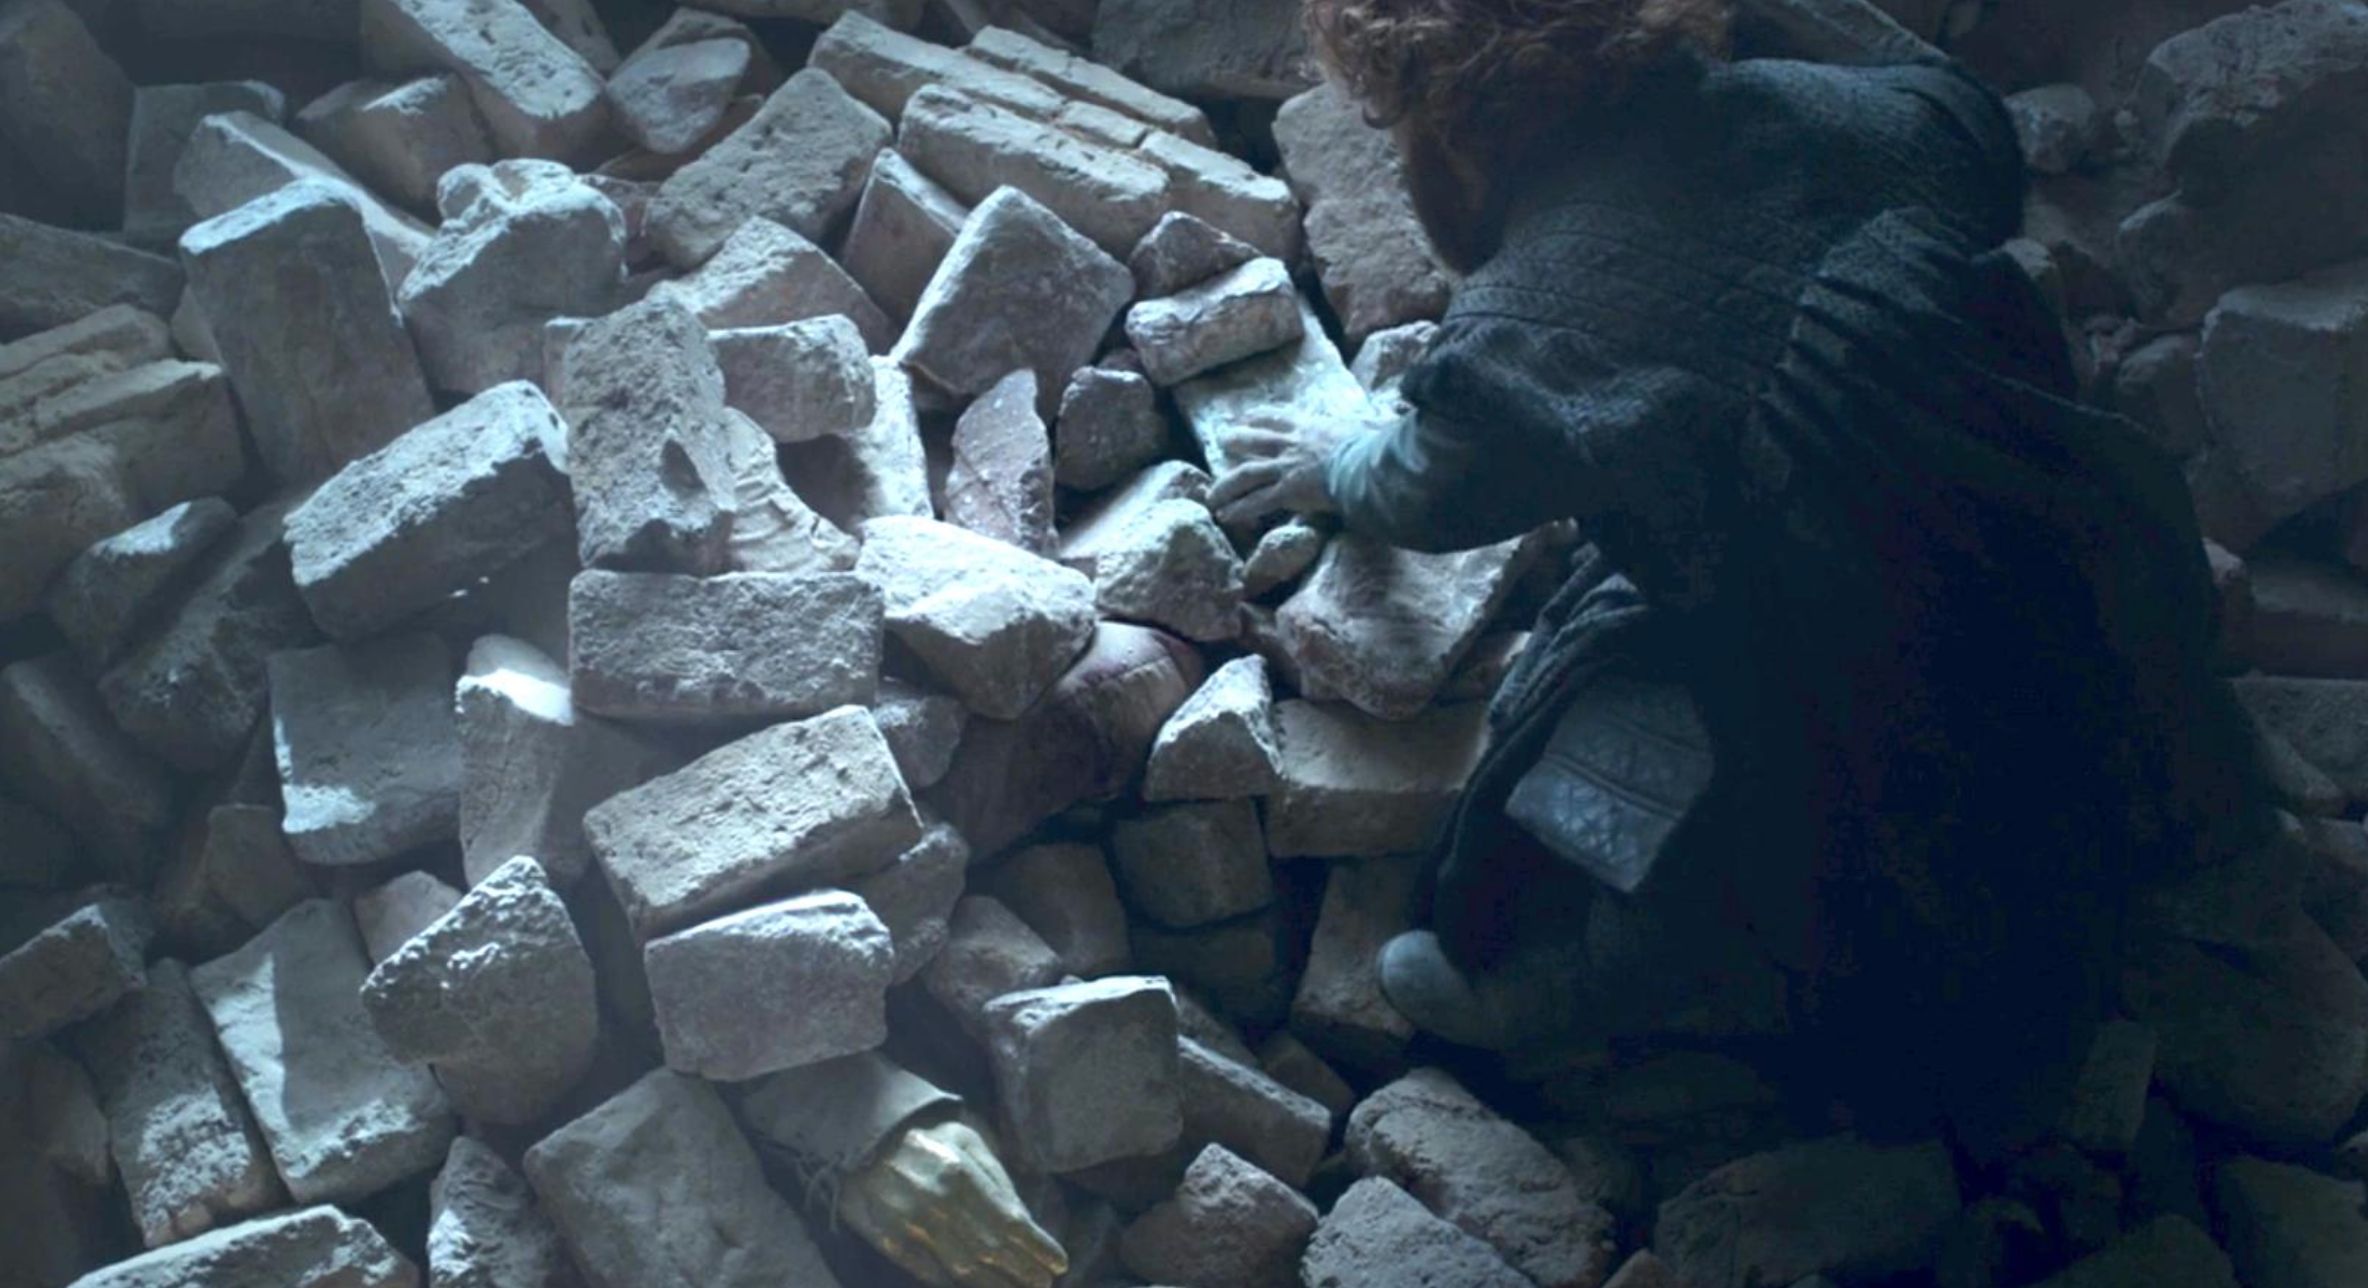 Tyrionâ€™s Discovery In The Rubble At Kingâ€™s Landing Broke Lots Of Hearts